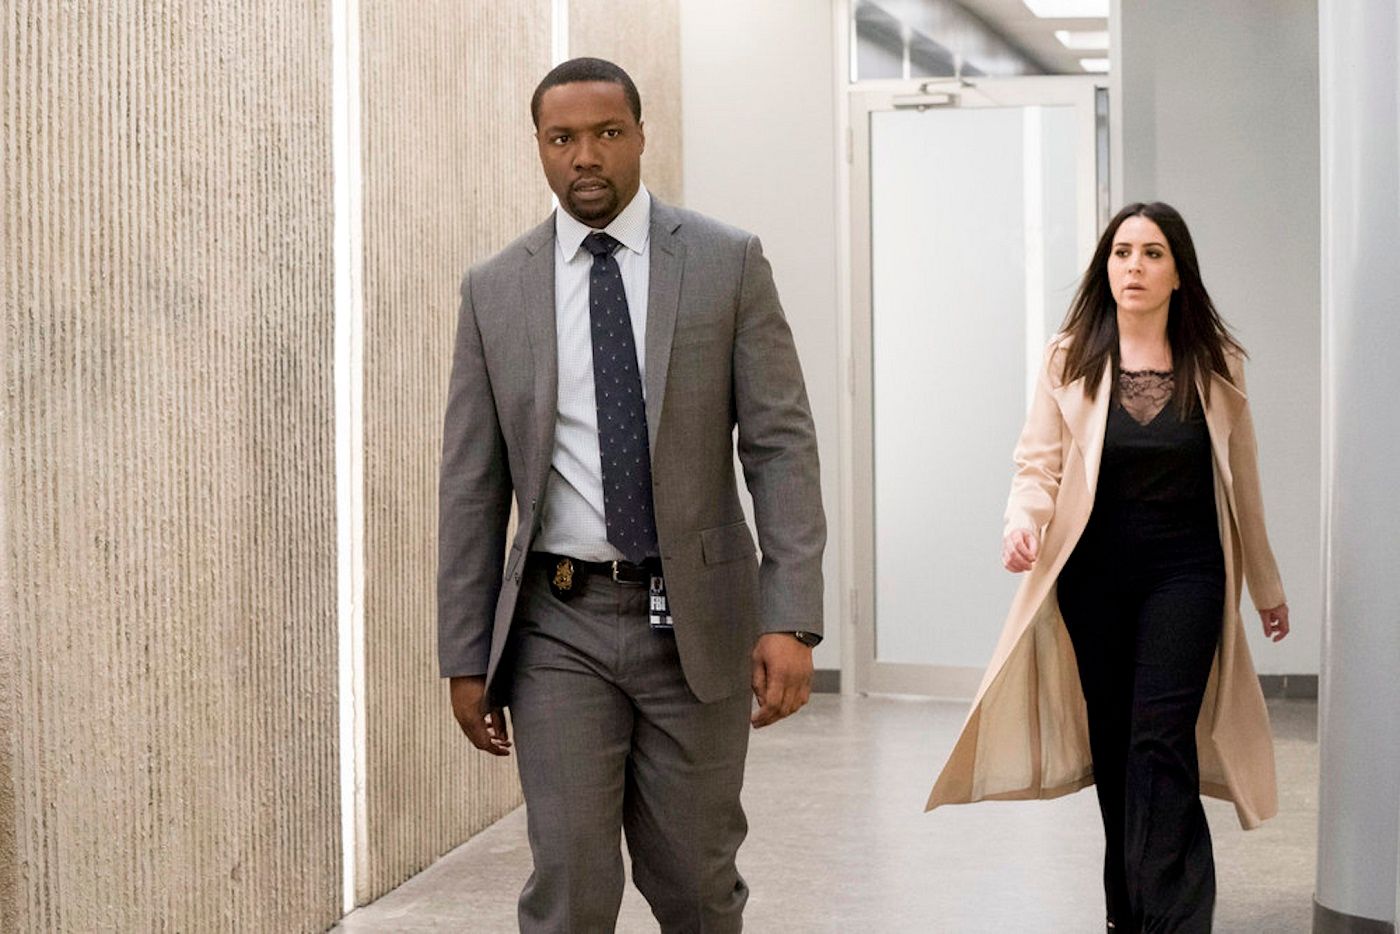 Blindspot: 10 Questions We Need Answered In The Final Season